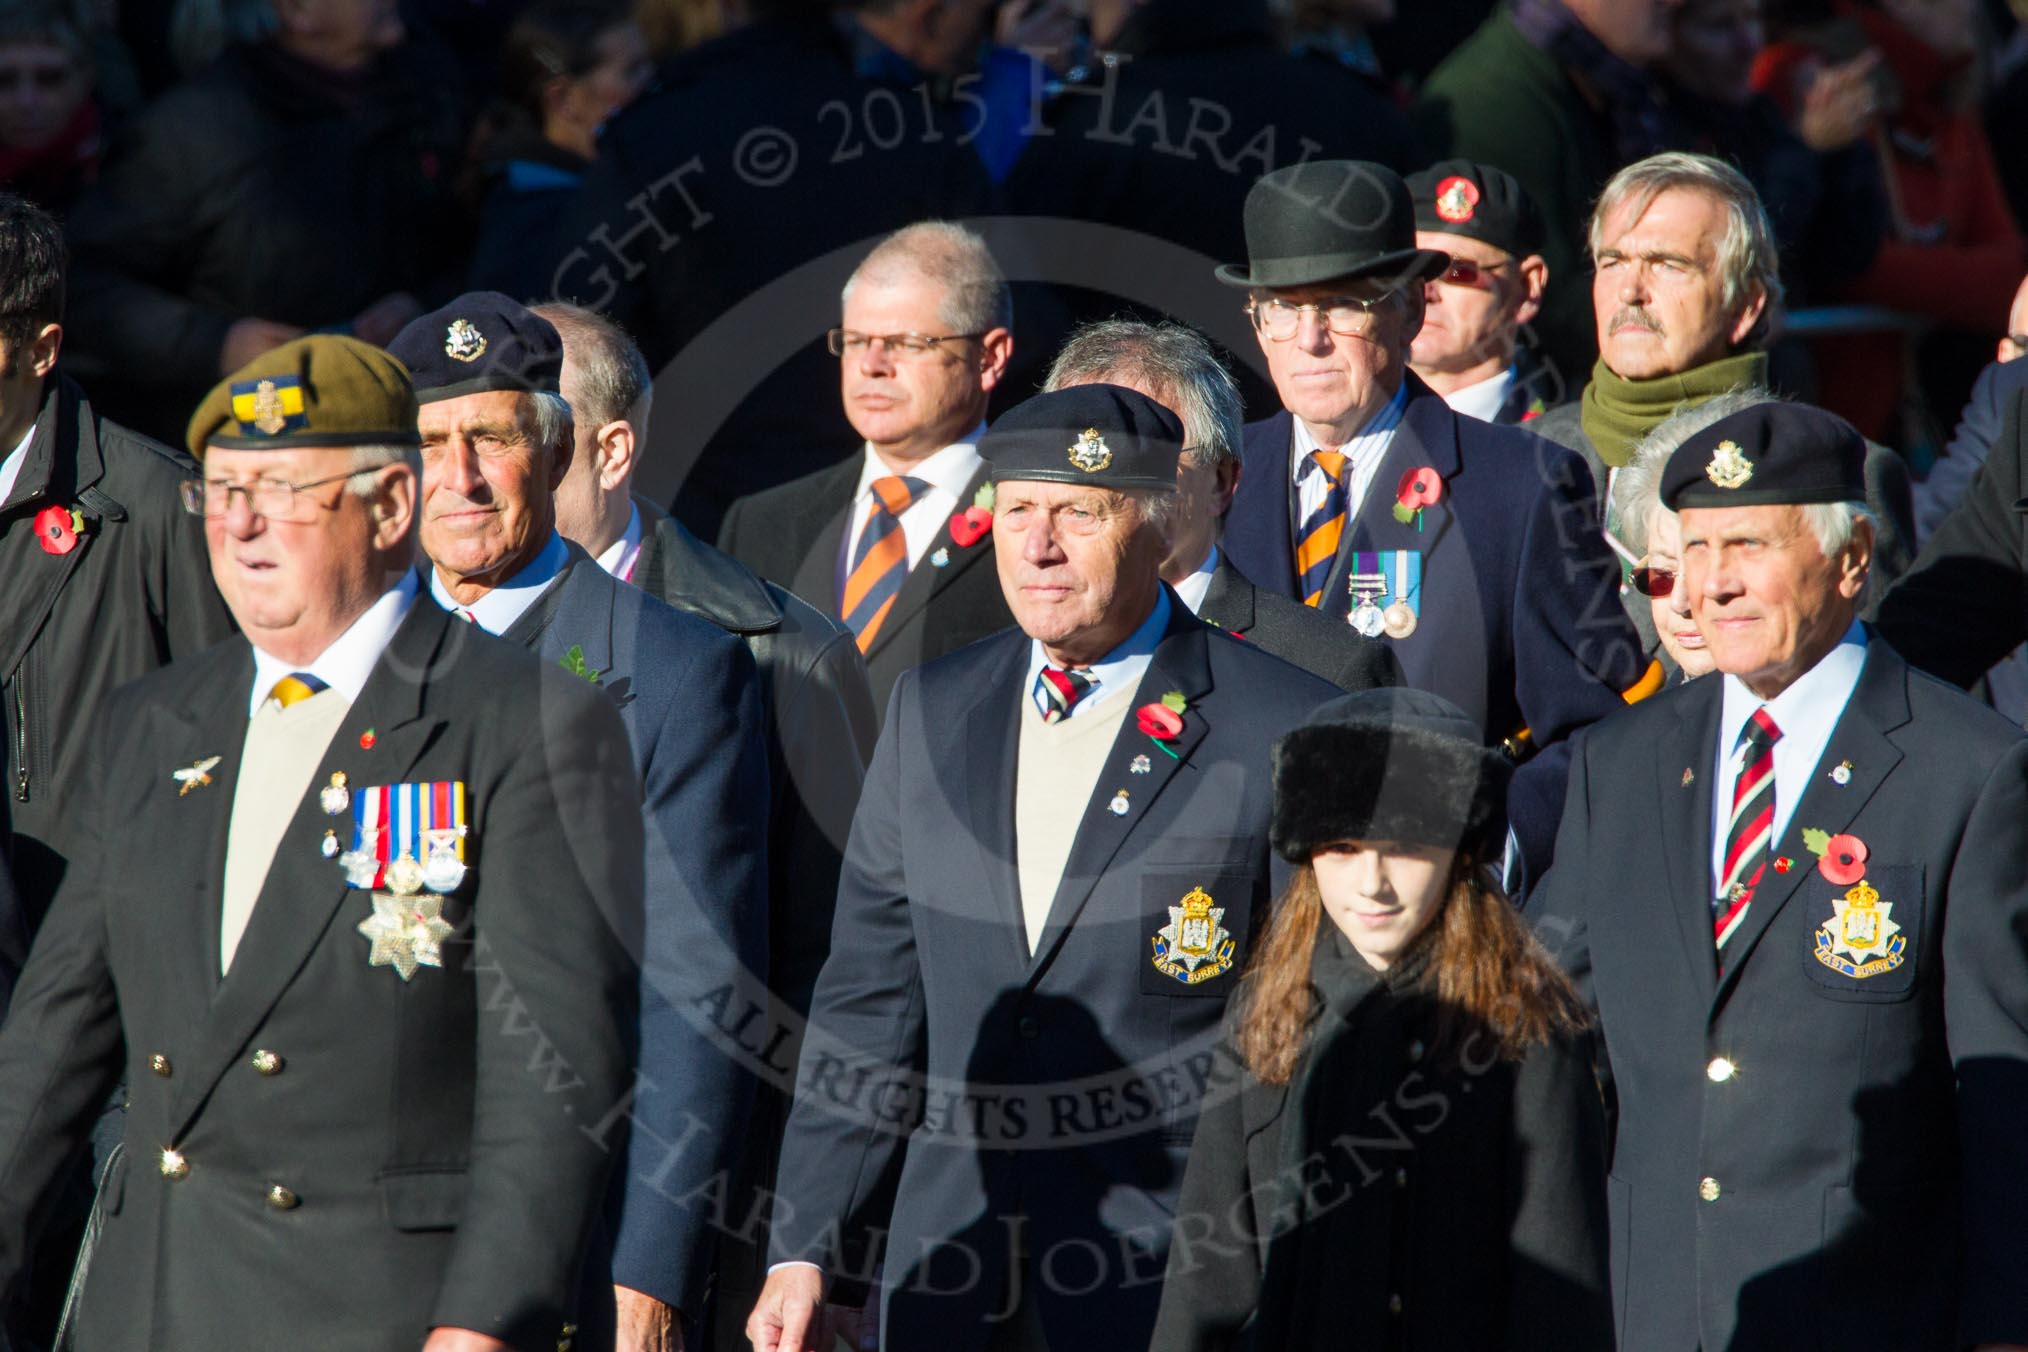 Remembrance Sunday Cenotaph March Past 2013: A32 - Royal East Kent Regiment (The Buffs) Past & Present Association..
Press stand opposite the Foreign Office building, Whitehall, London SW1,
London,
Greater London,
United Kingdom,
on 10 November 2013 at 11:58, image #1280